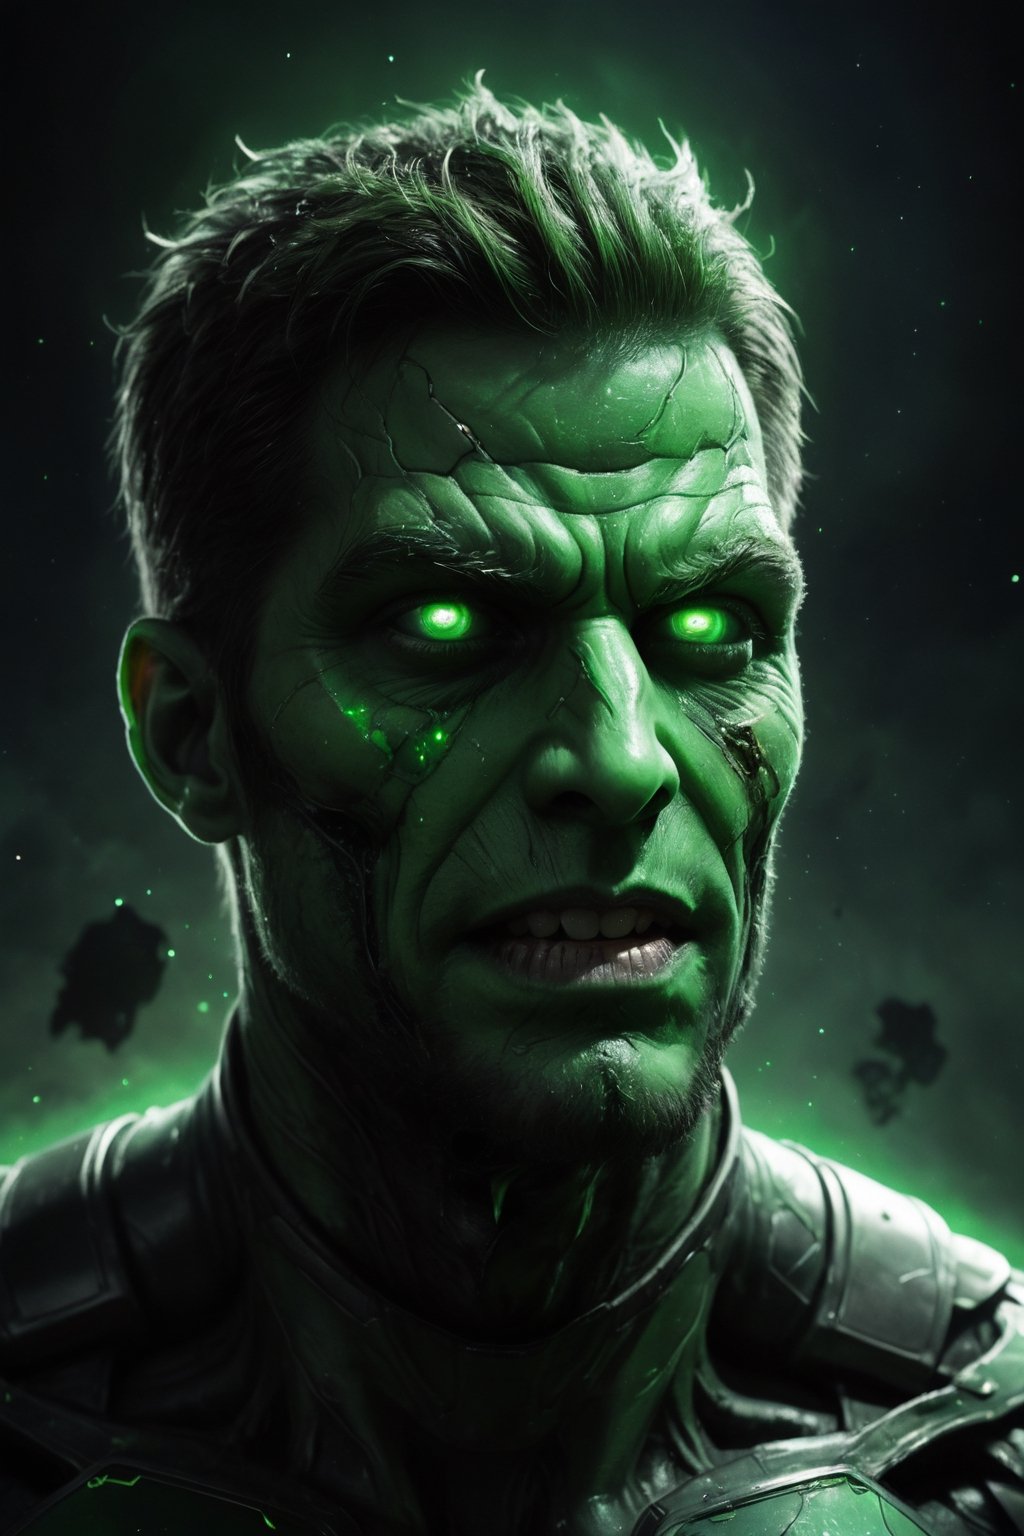 A detailed, realistic digital painting of Zombie Green Lantern in the style of Zack Snyder. He is flying through space at night, the only light coming from the Green Lantern ring and the stars in the sky. Zombie Green Lantern's skin is pale and decaying, his eyes are glowing green, and he is wearing a tattered green and black suit. The image is post-processed with color grading, film grain, space effects, and blood and gore effects.

